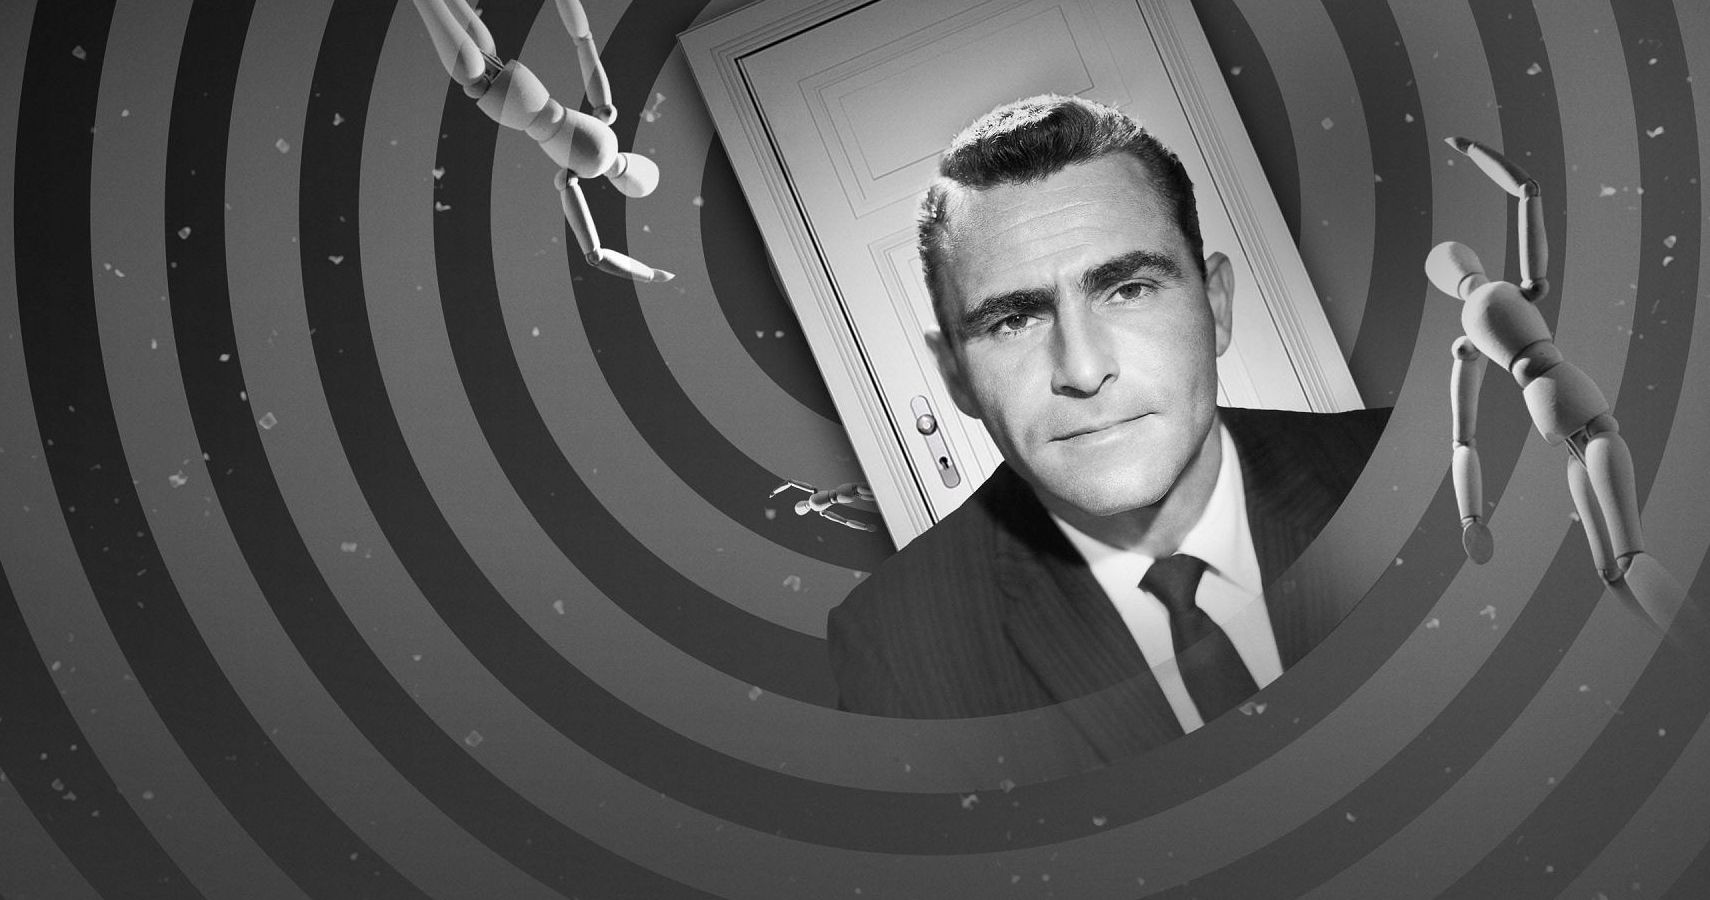 Twilight Zone and how it impressed me this year. Watch and you'll